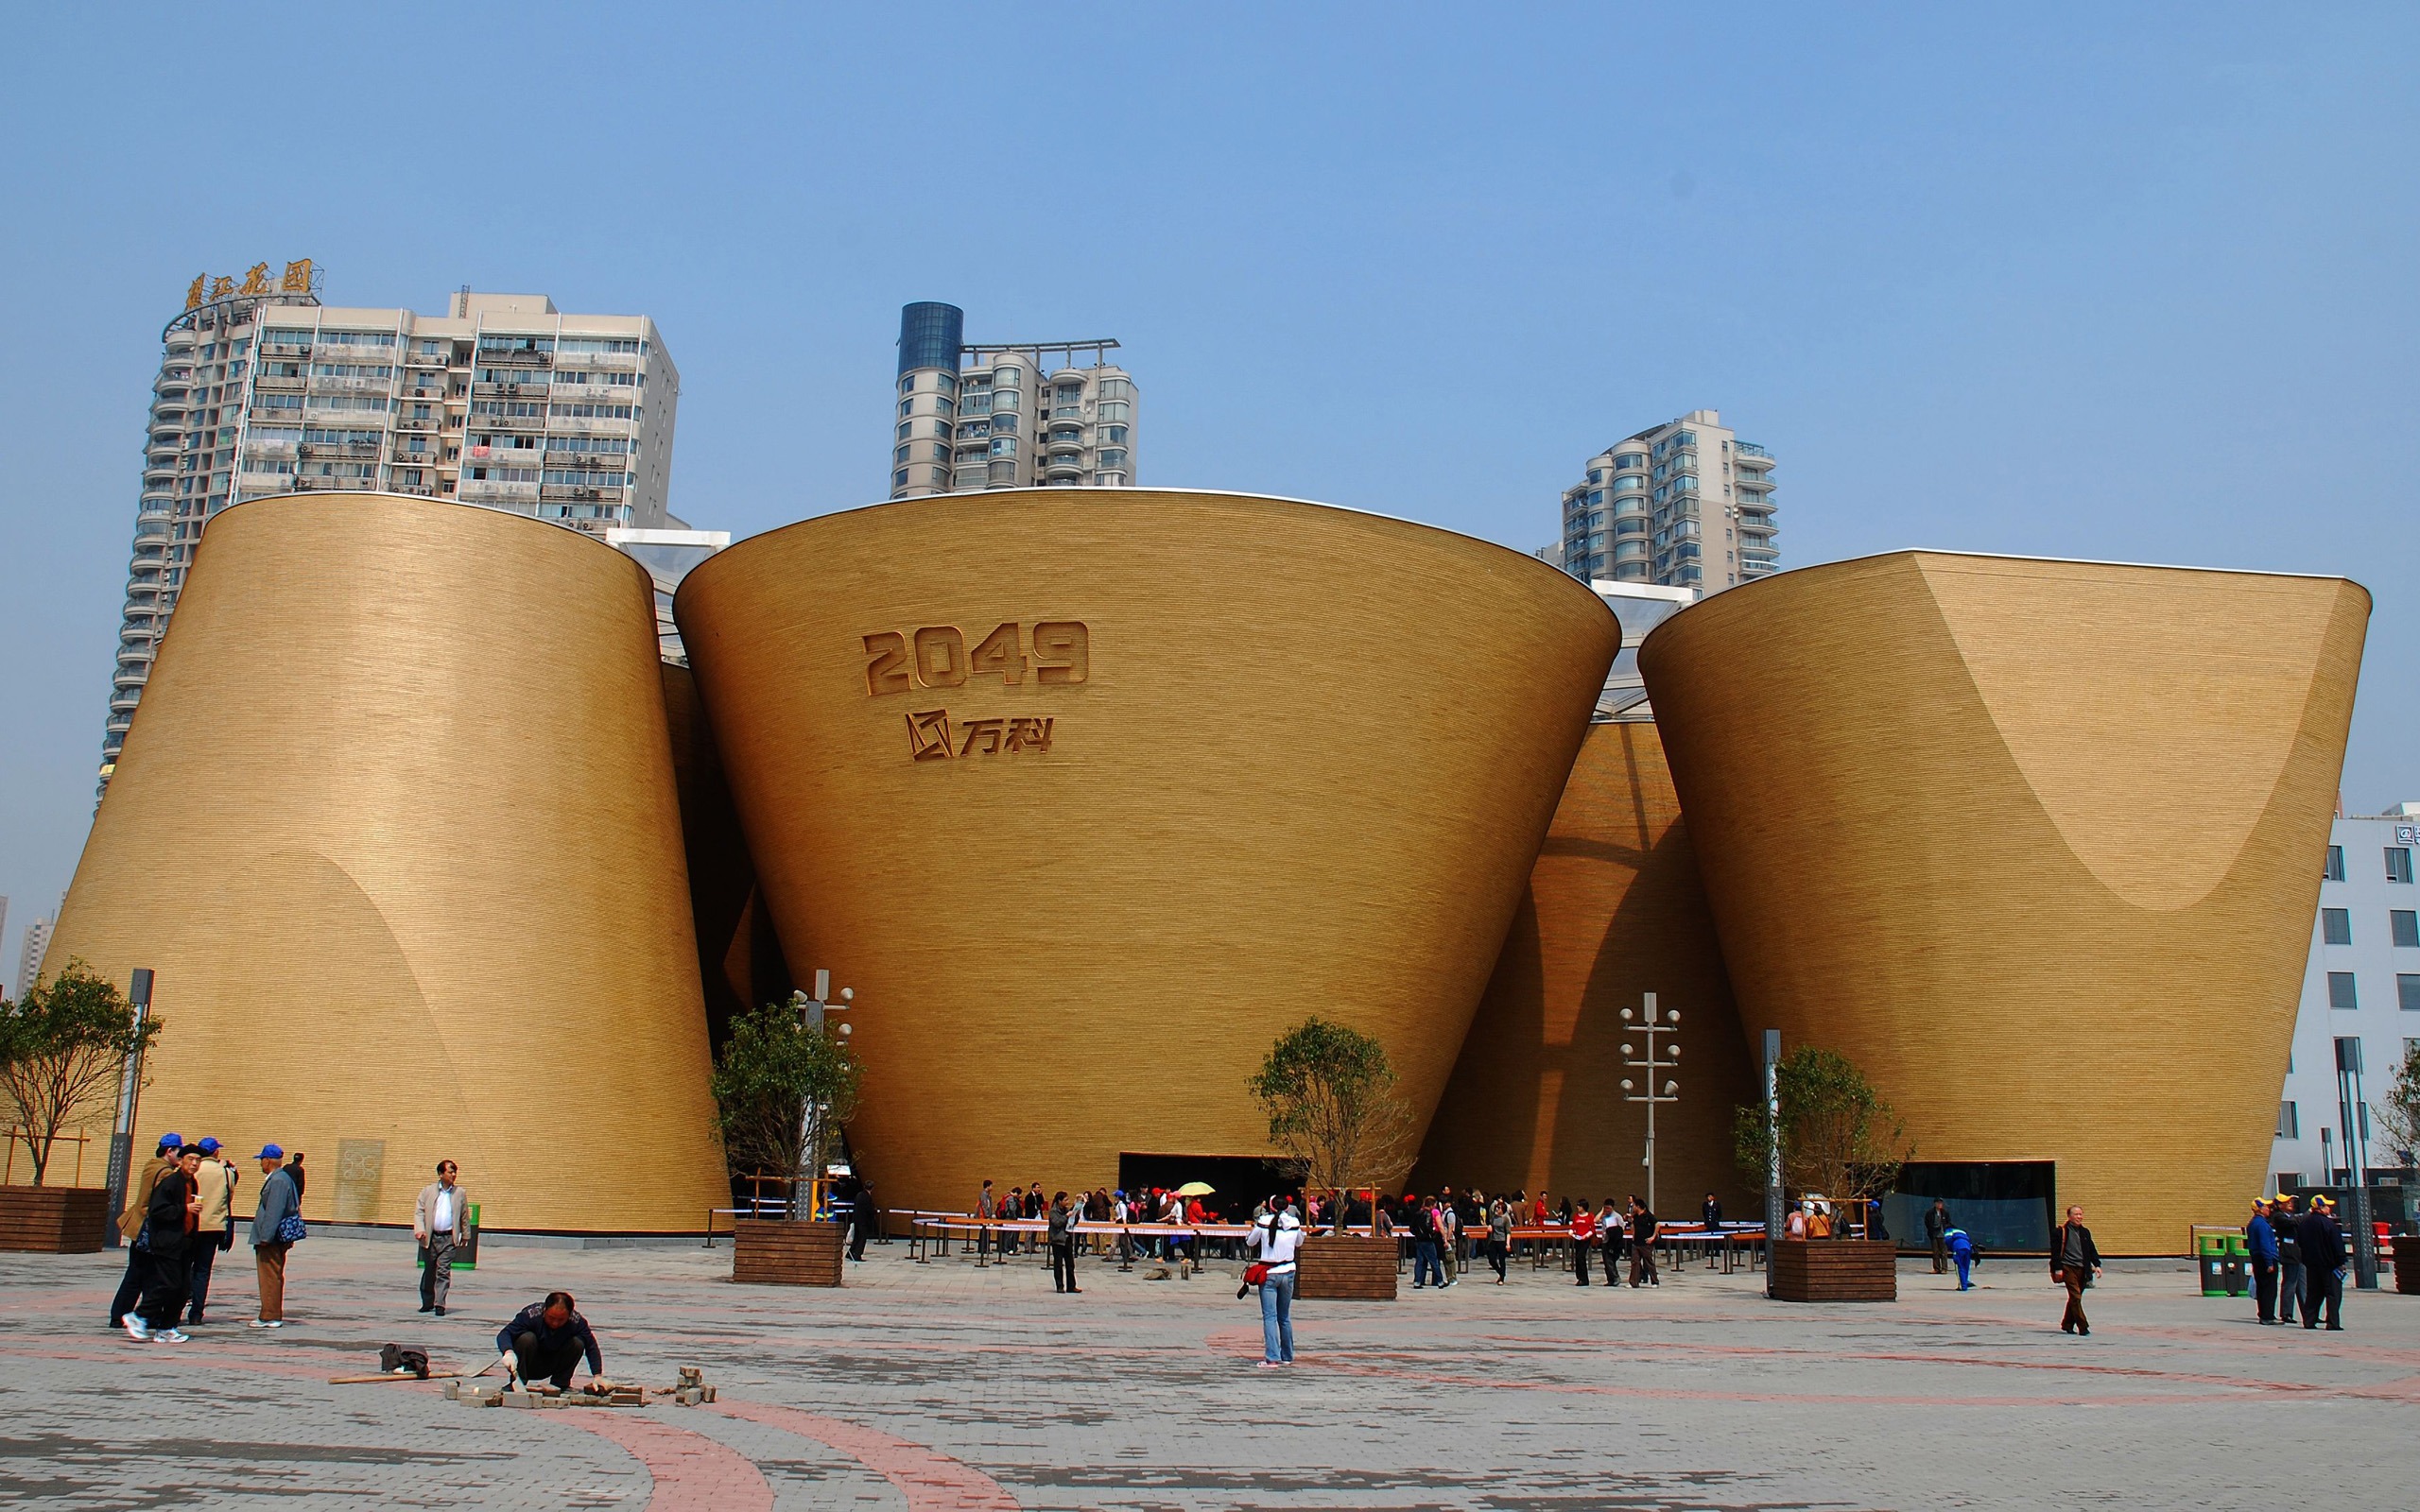 Commissioning of the 2010 Shanghai World Expo (studious works) #17 - 2560x1600